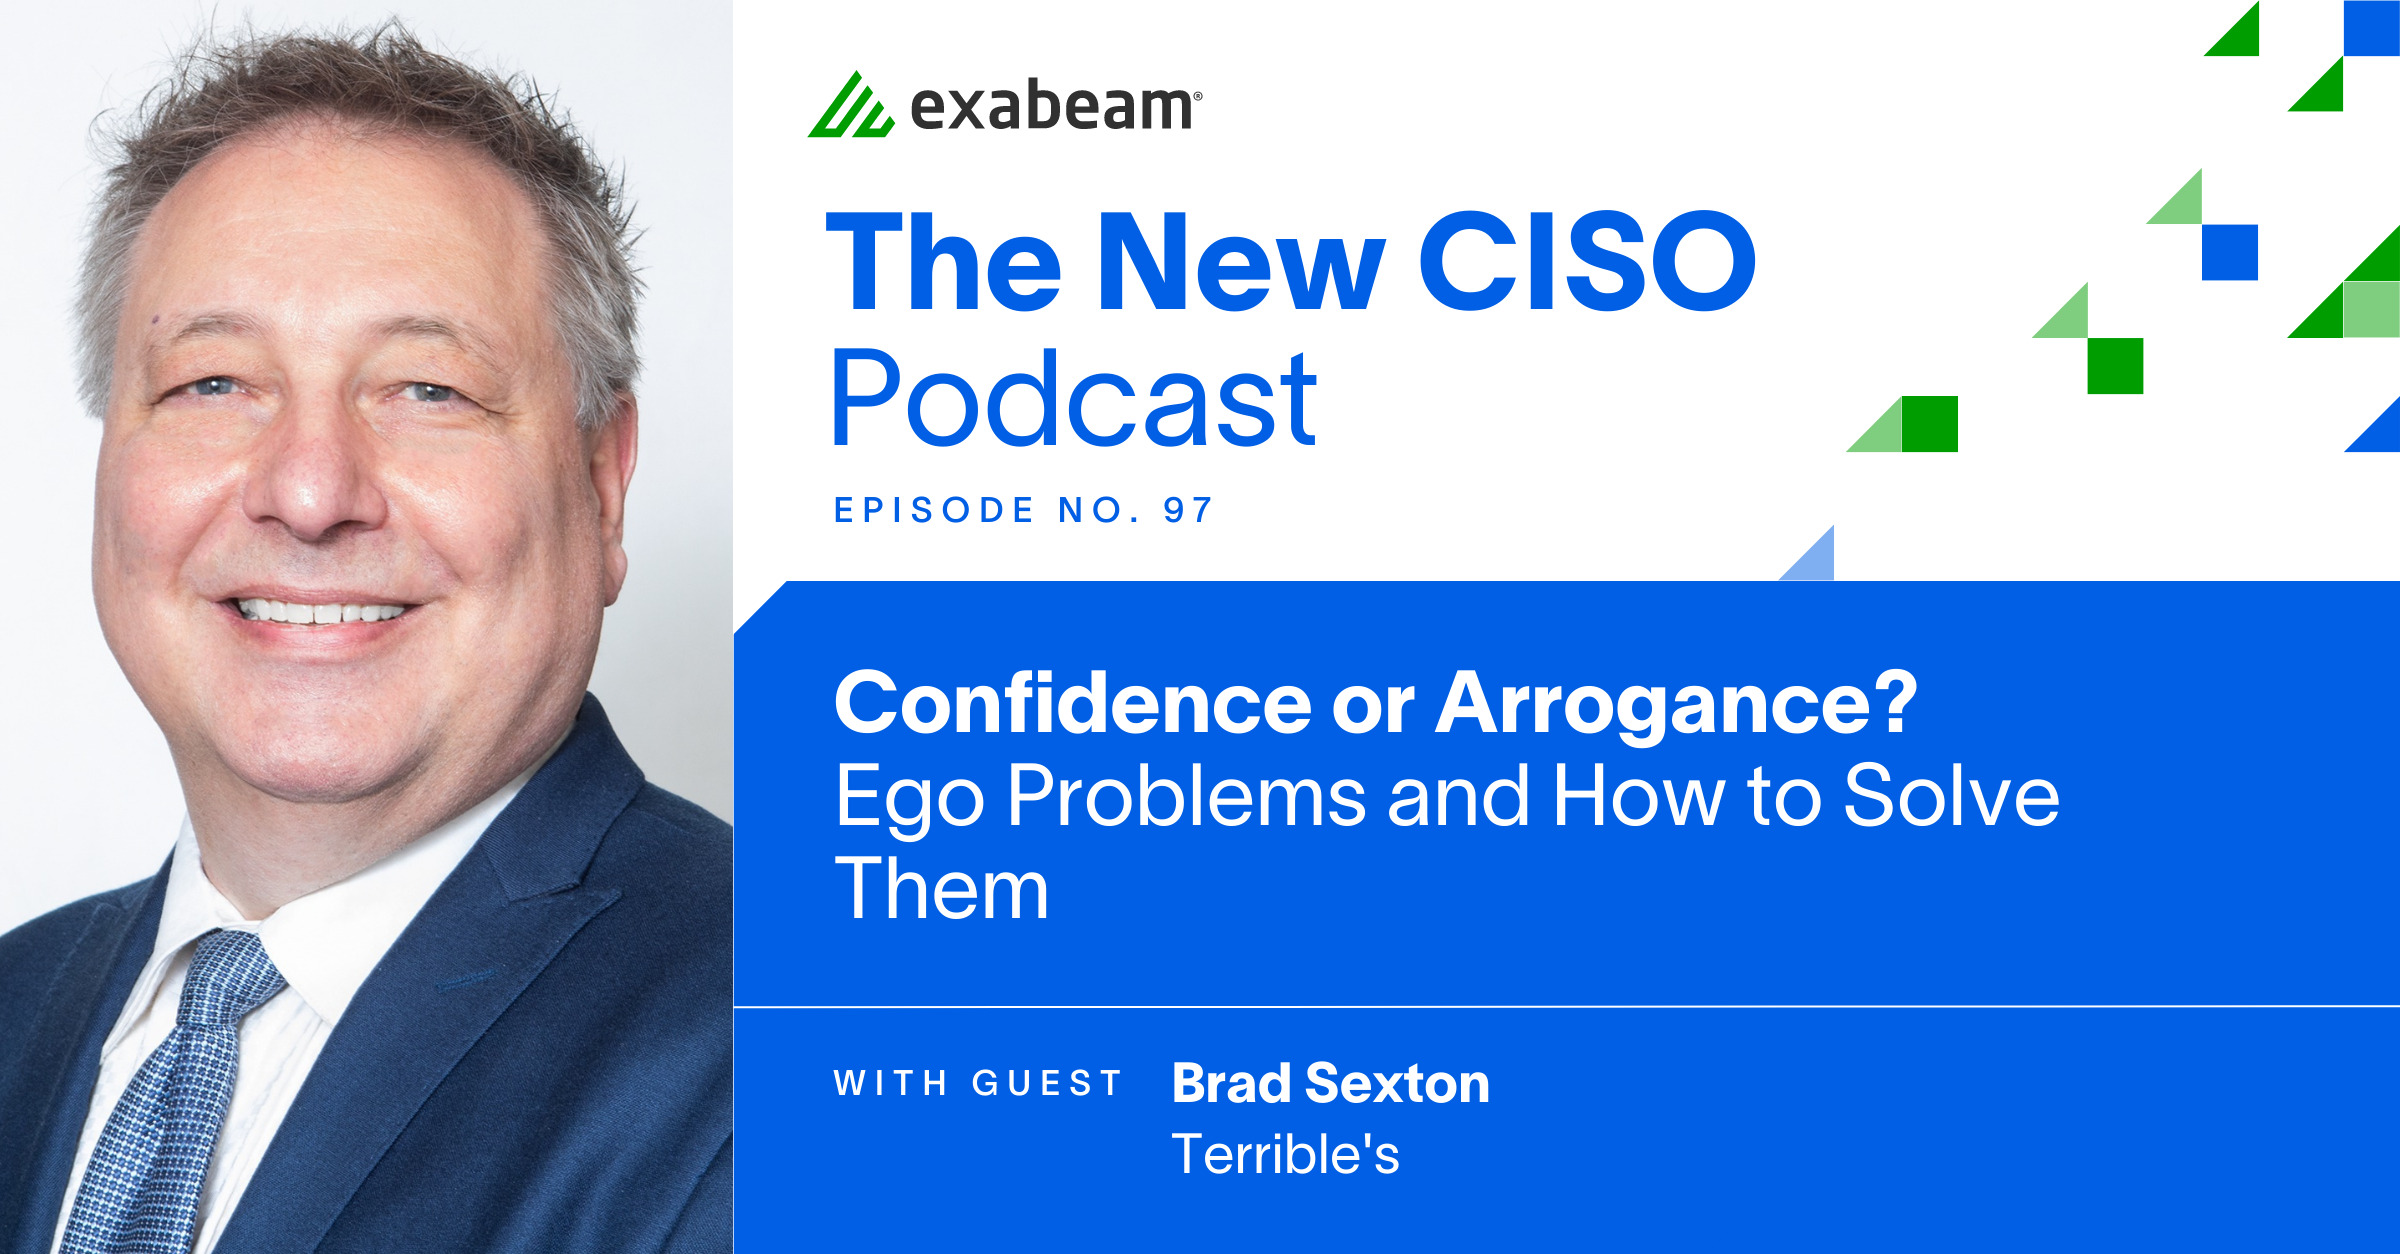 The New CISO Podcast Episode 97: Confidence or Arrogance? Ego Problems and How to Solve Them